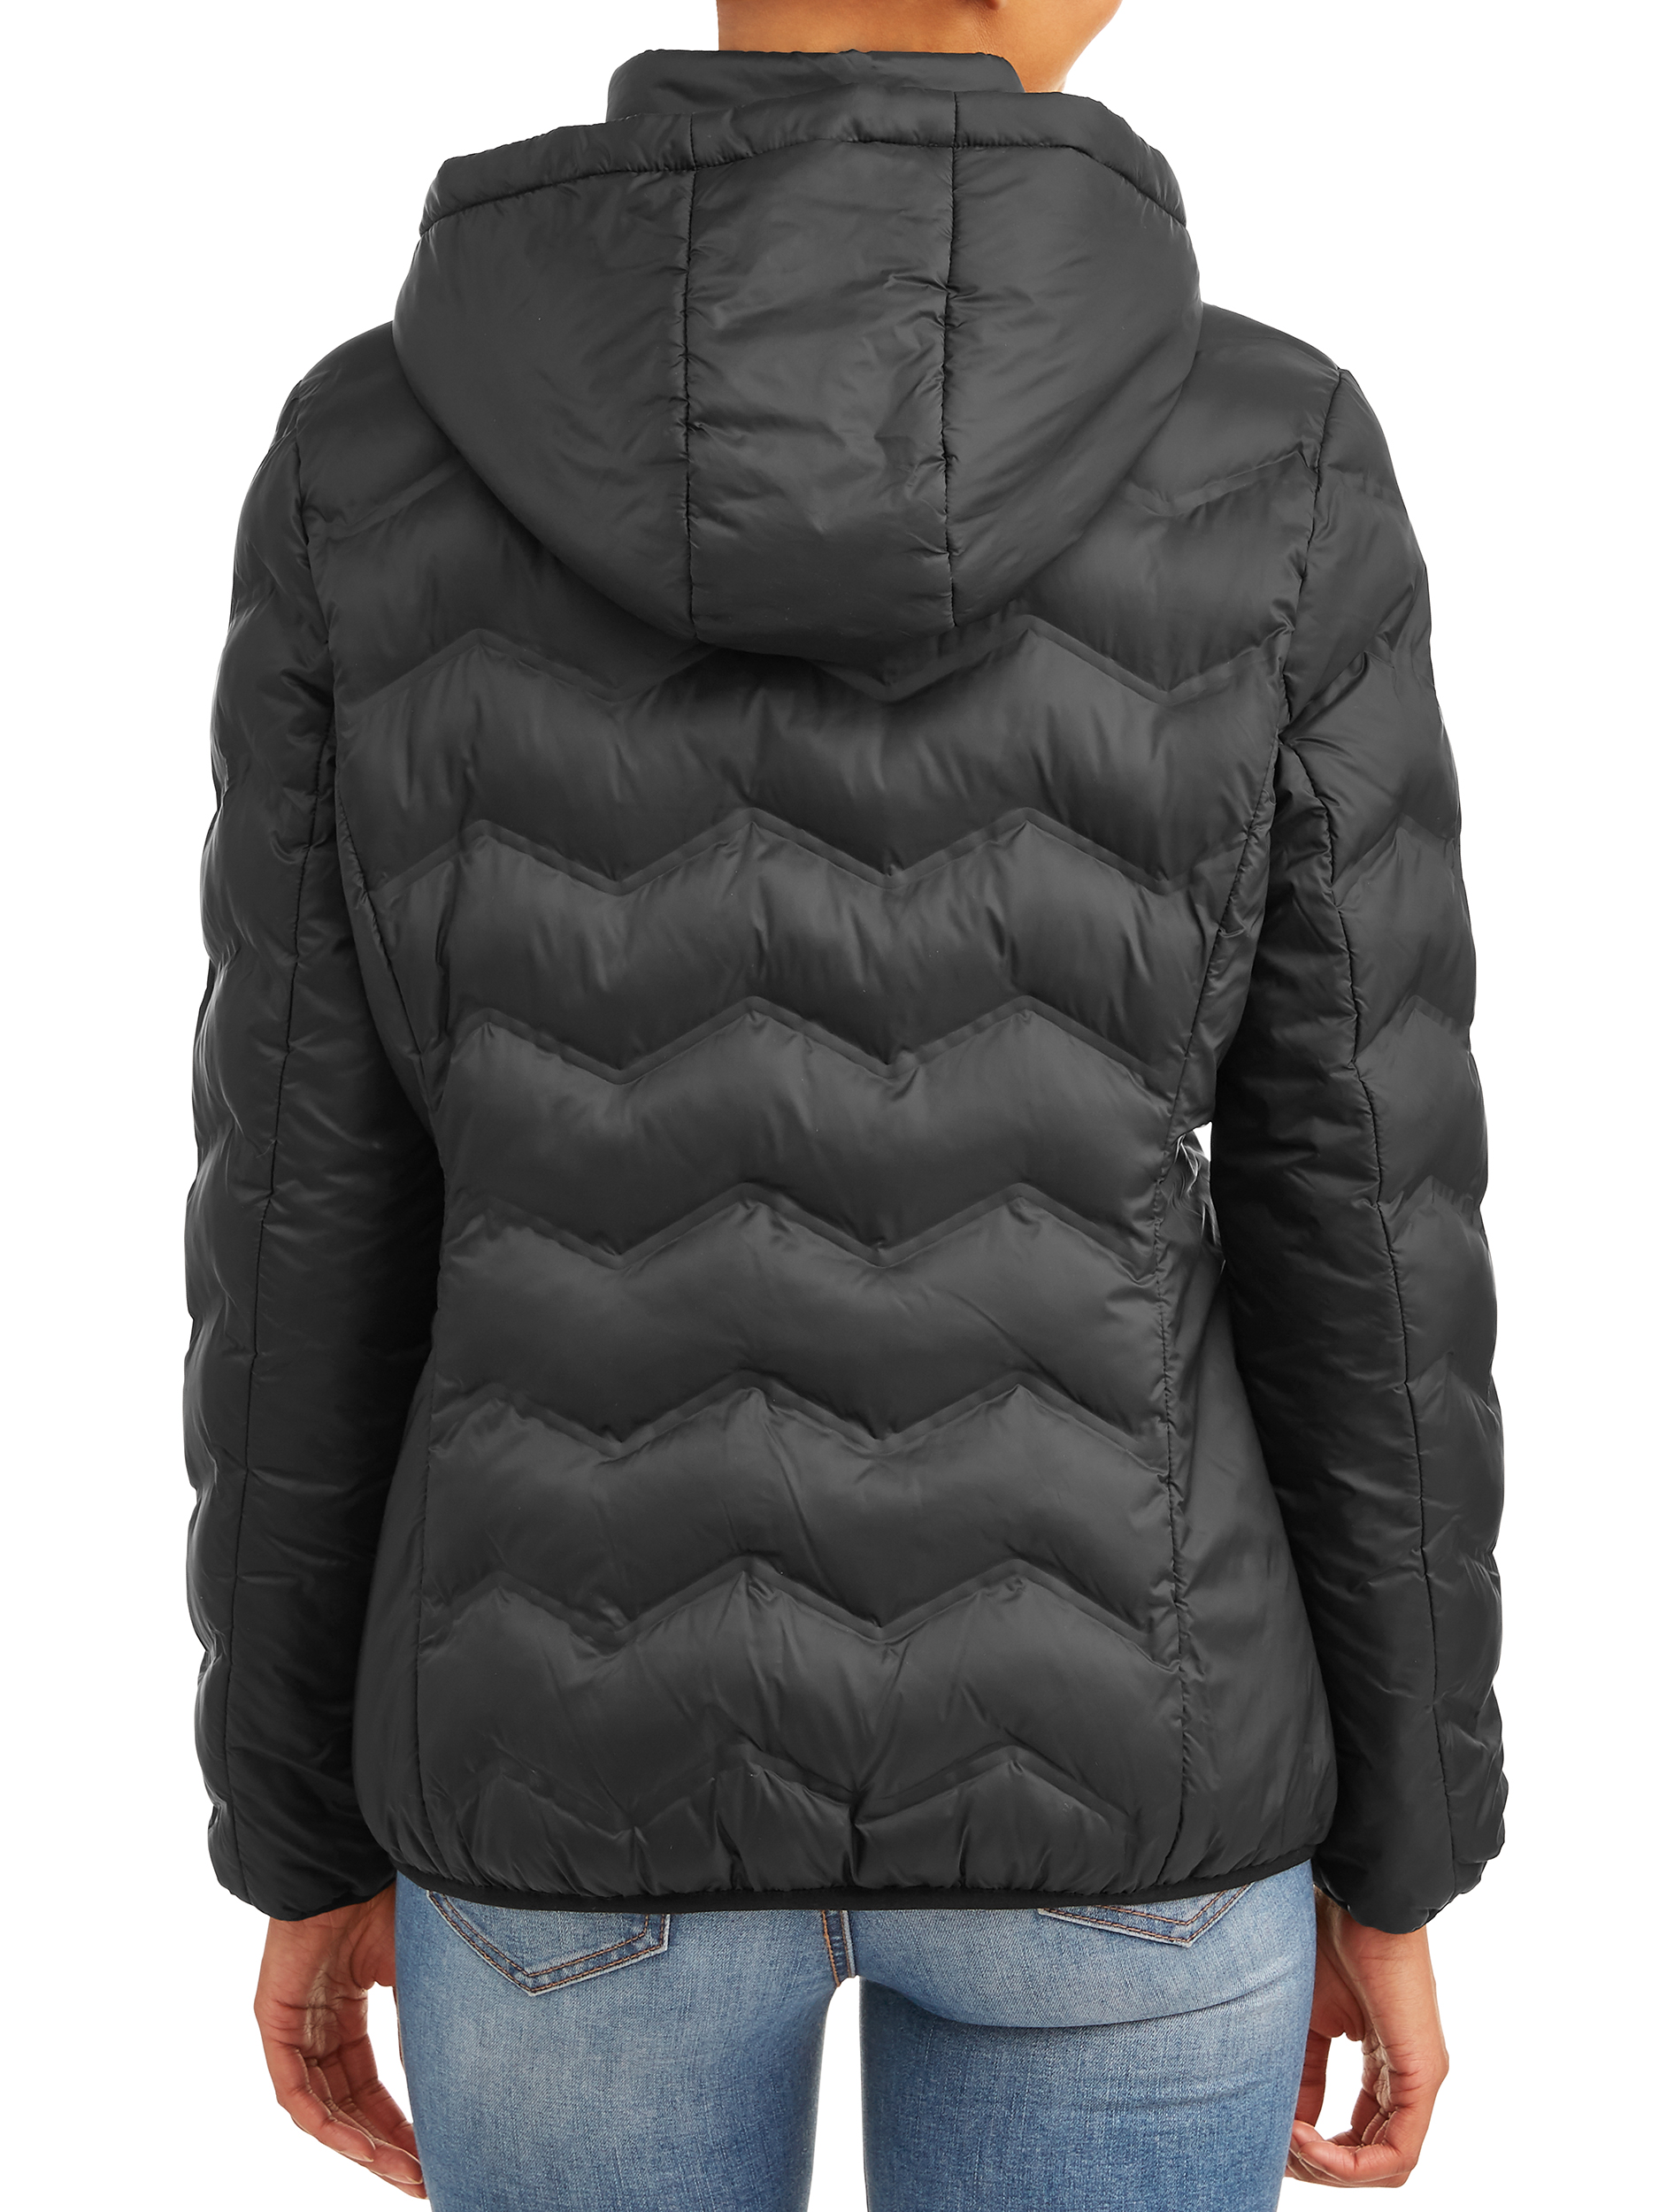 Time and Tru Women's Puffer Coat with Hood - image 4 of 4